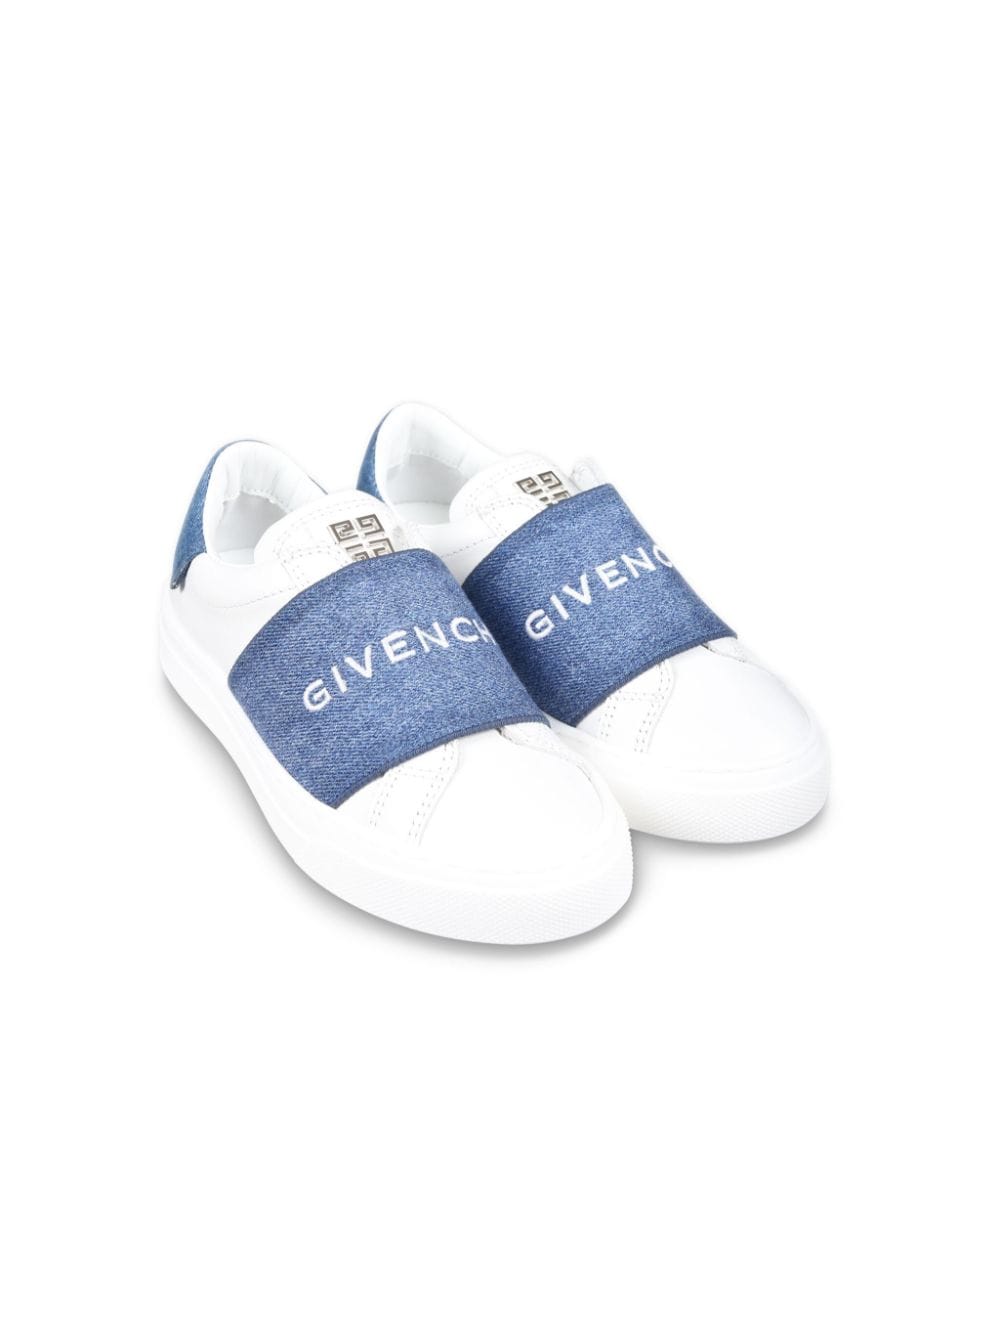 Givenchy Kids denim-panelled slip-on sneakers - White von Givenchy Kids